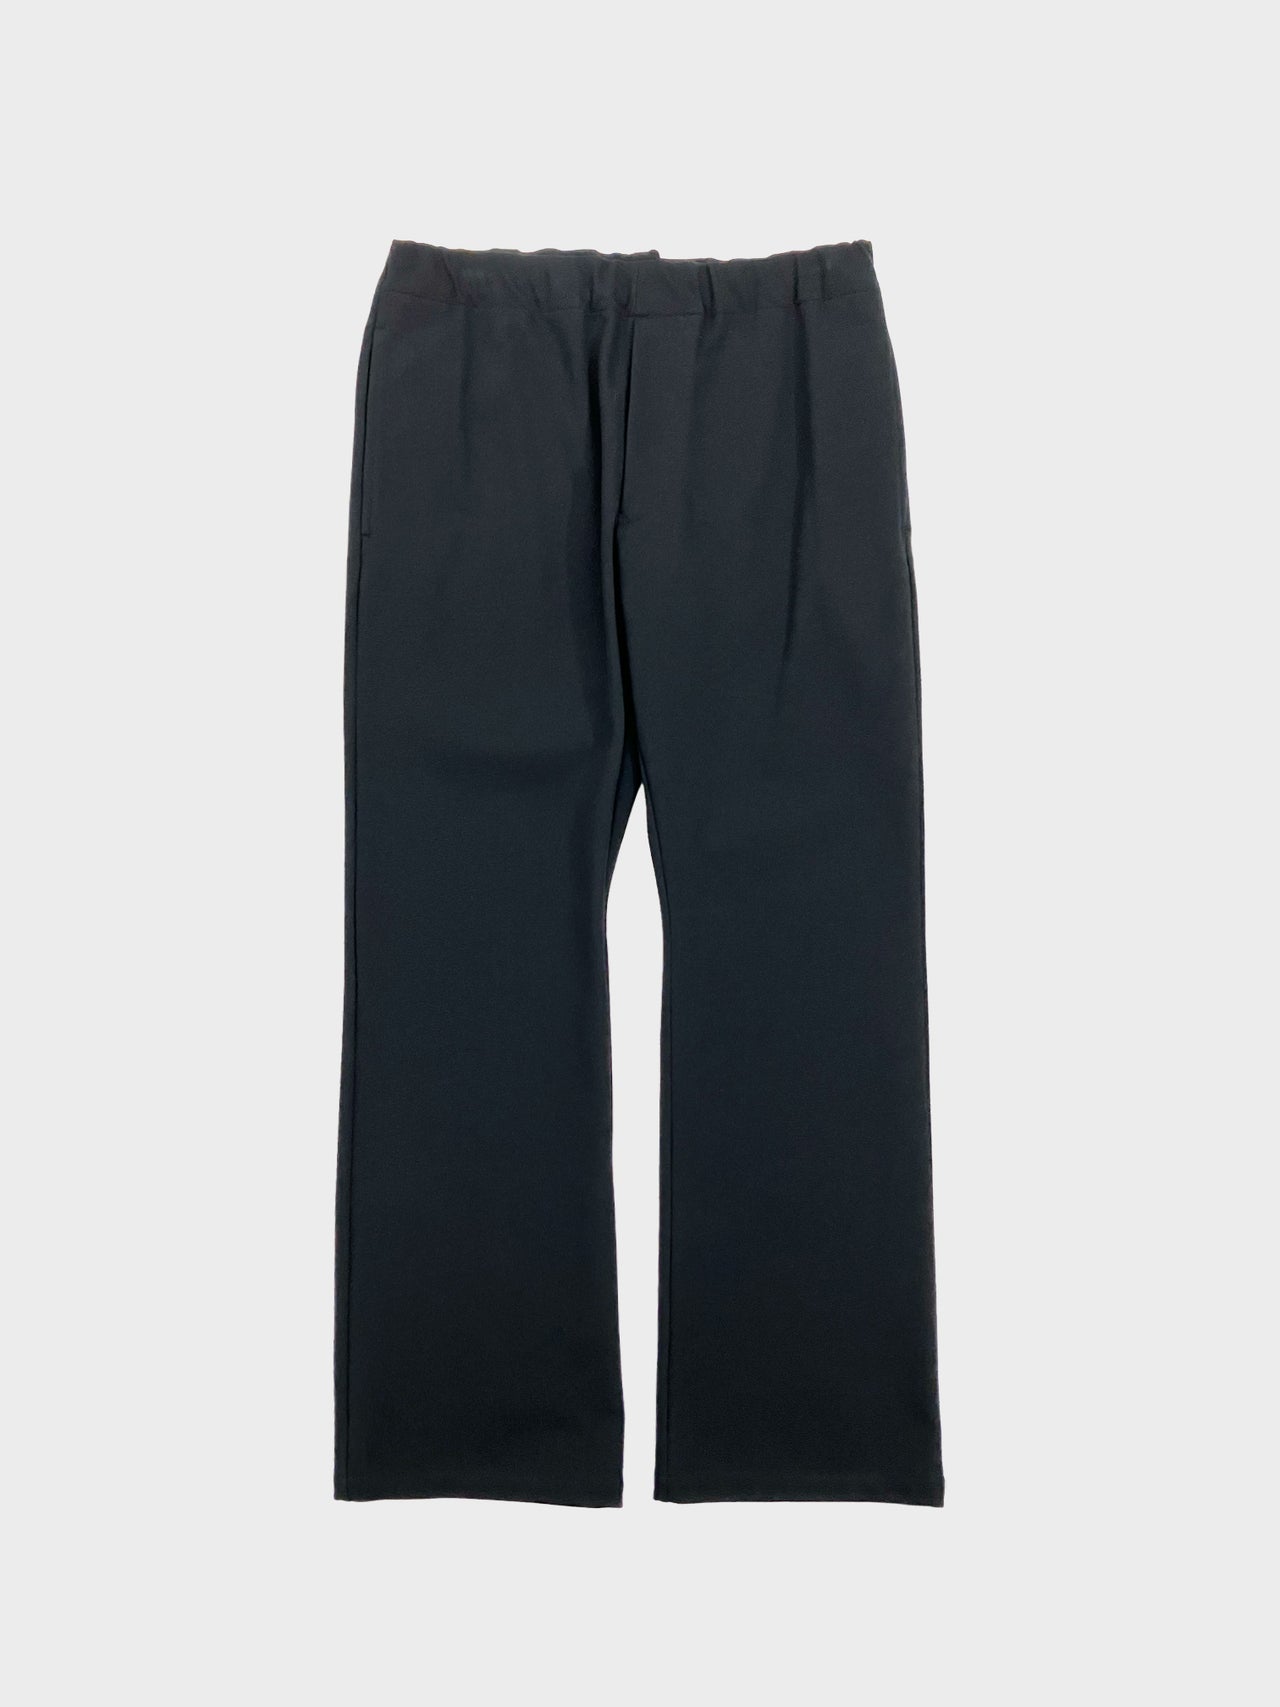 WEWILL / TRACK PANTS (BLACK)